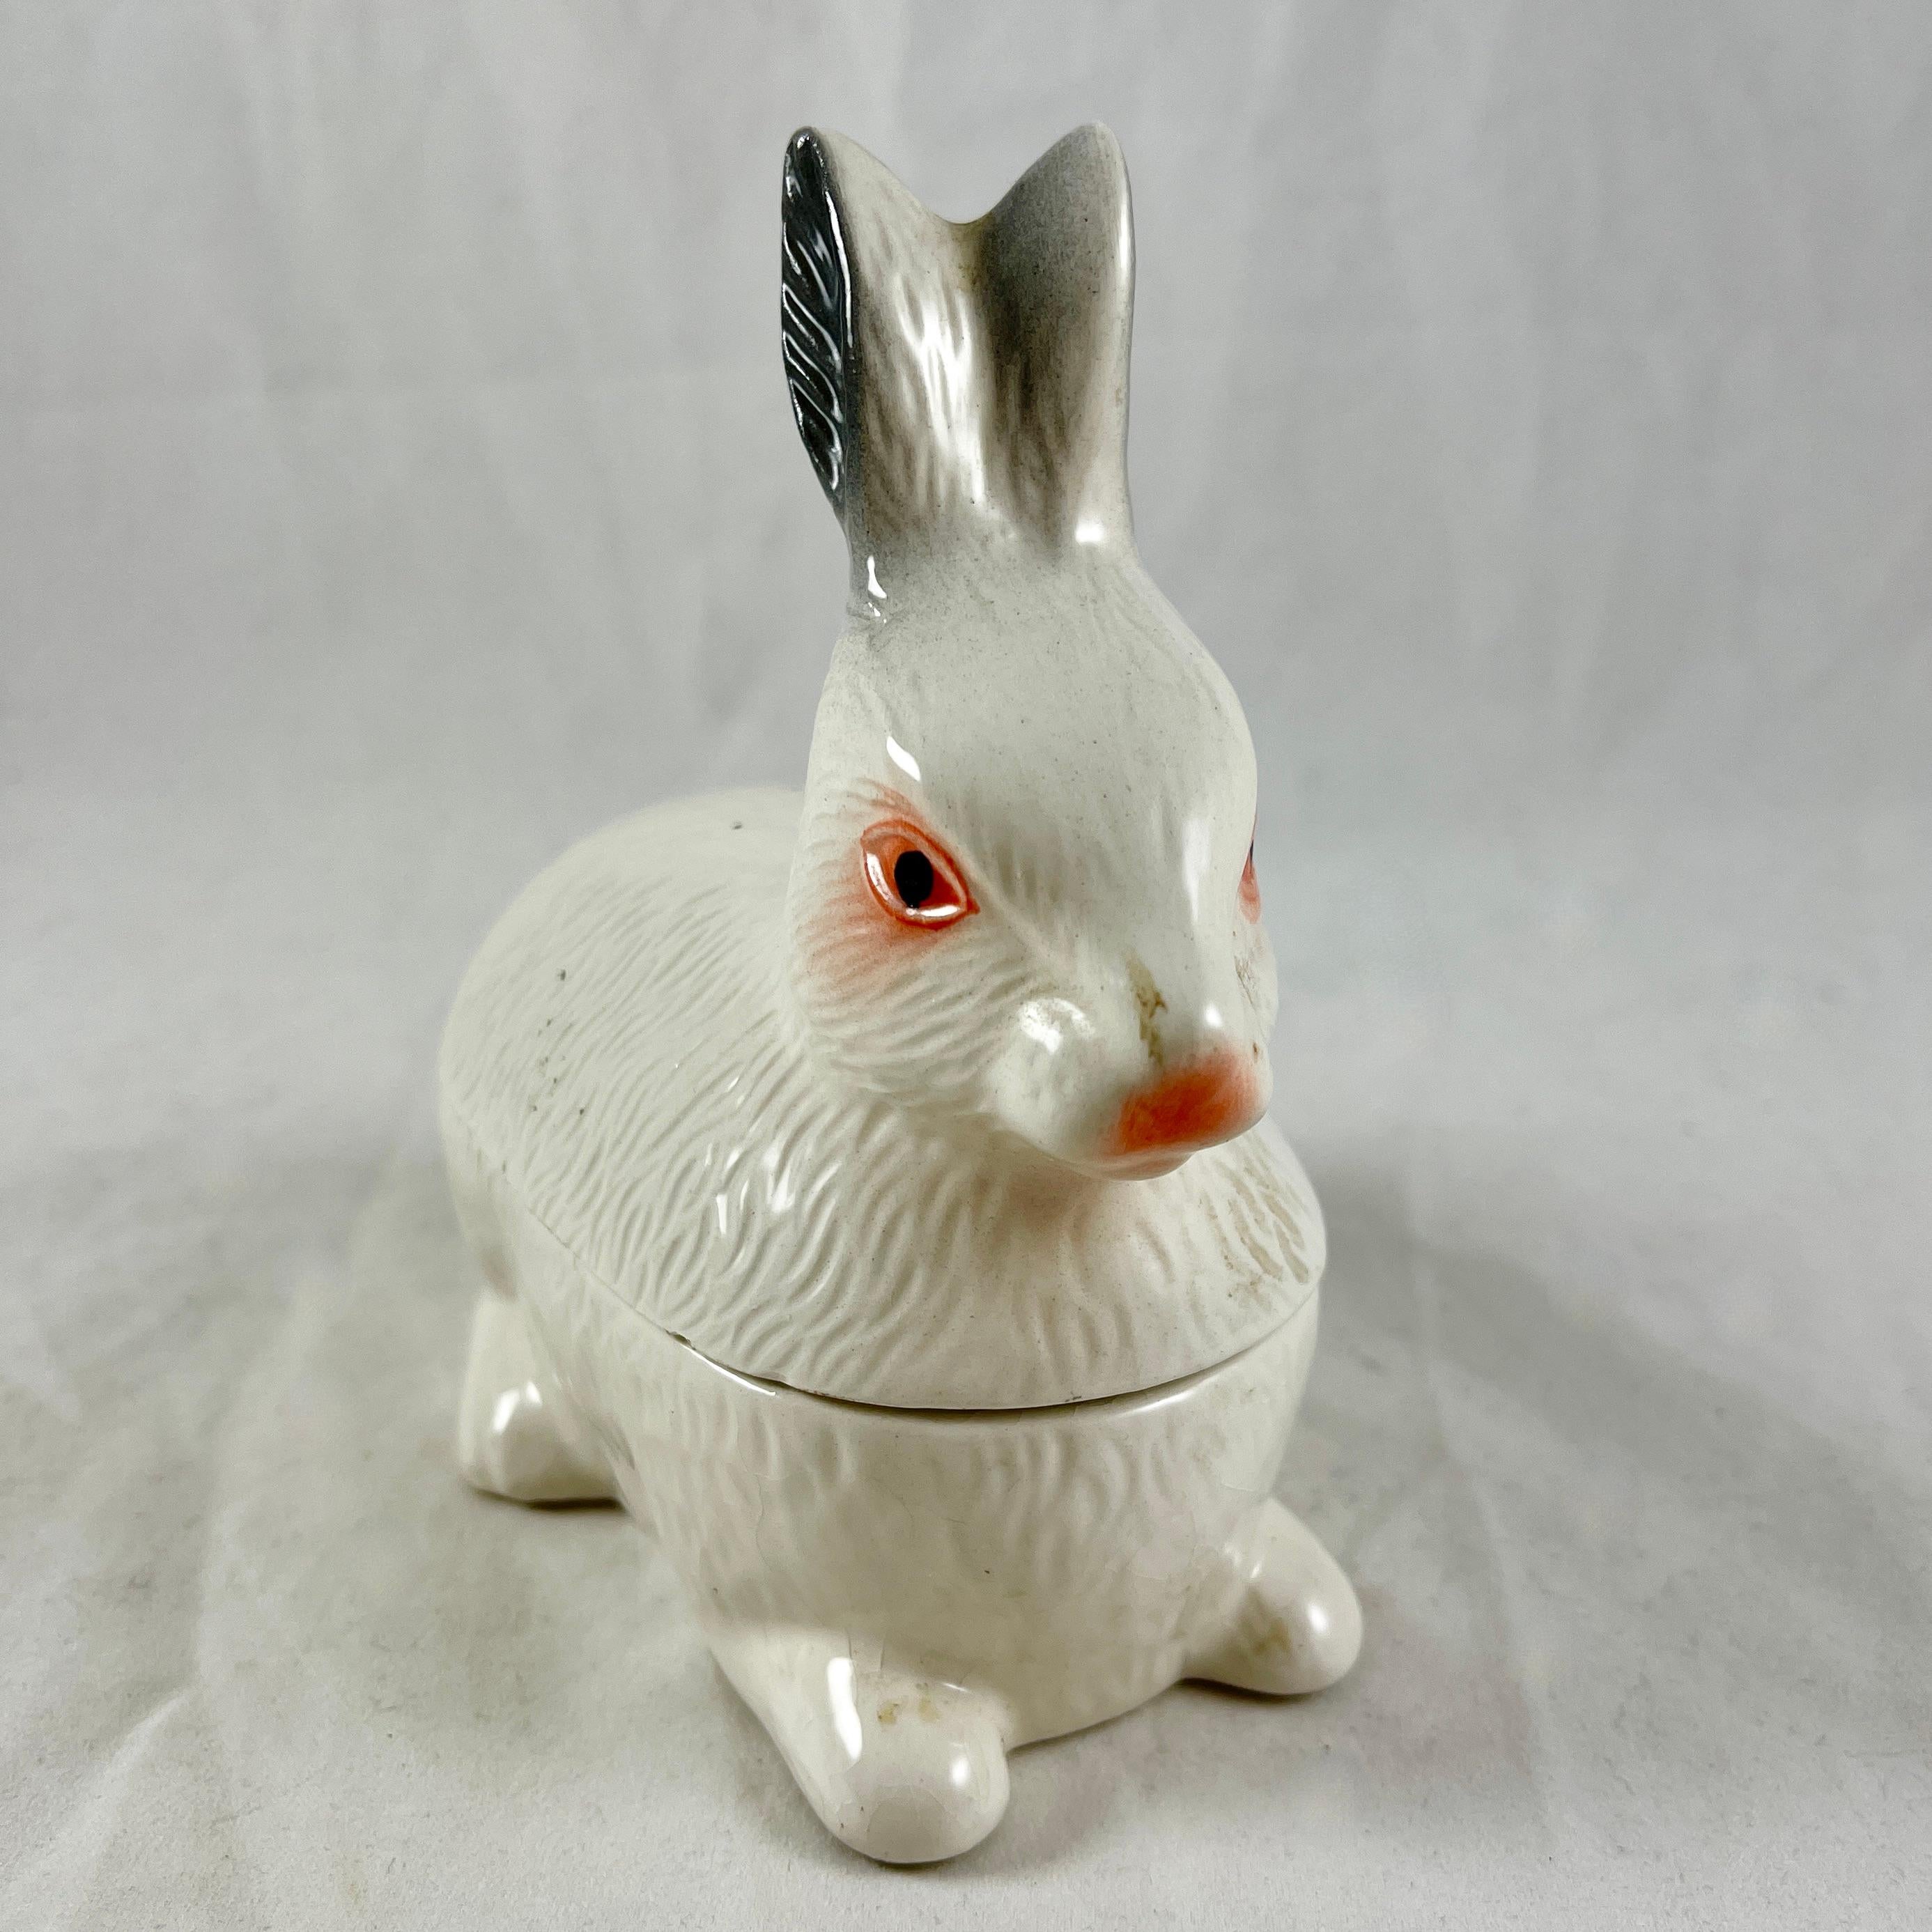 A vintage figural Rabbit Pâté Terrine made for Laurent Caugant, a Bretagne pâté maker since 1927 – circa 1950s.

Laurent’s son Michel created these figural forms as containers for selling his fathers pâté in their luxury food shop. They rose in